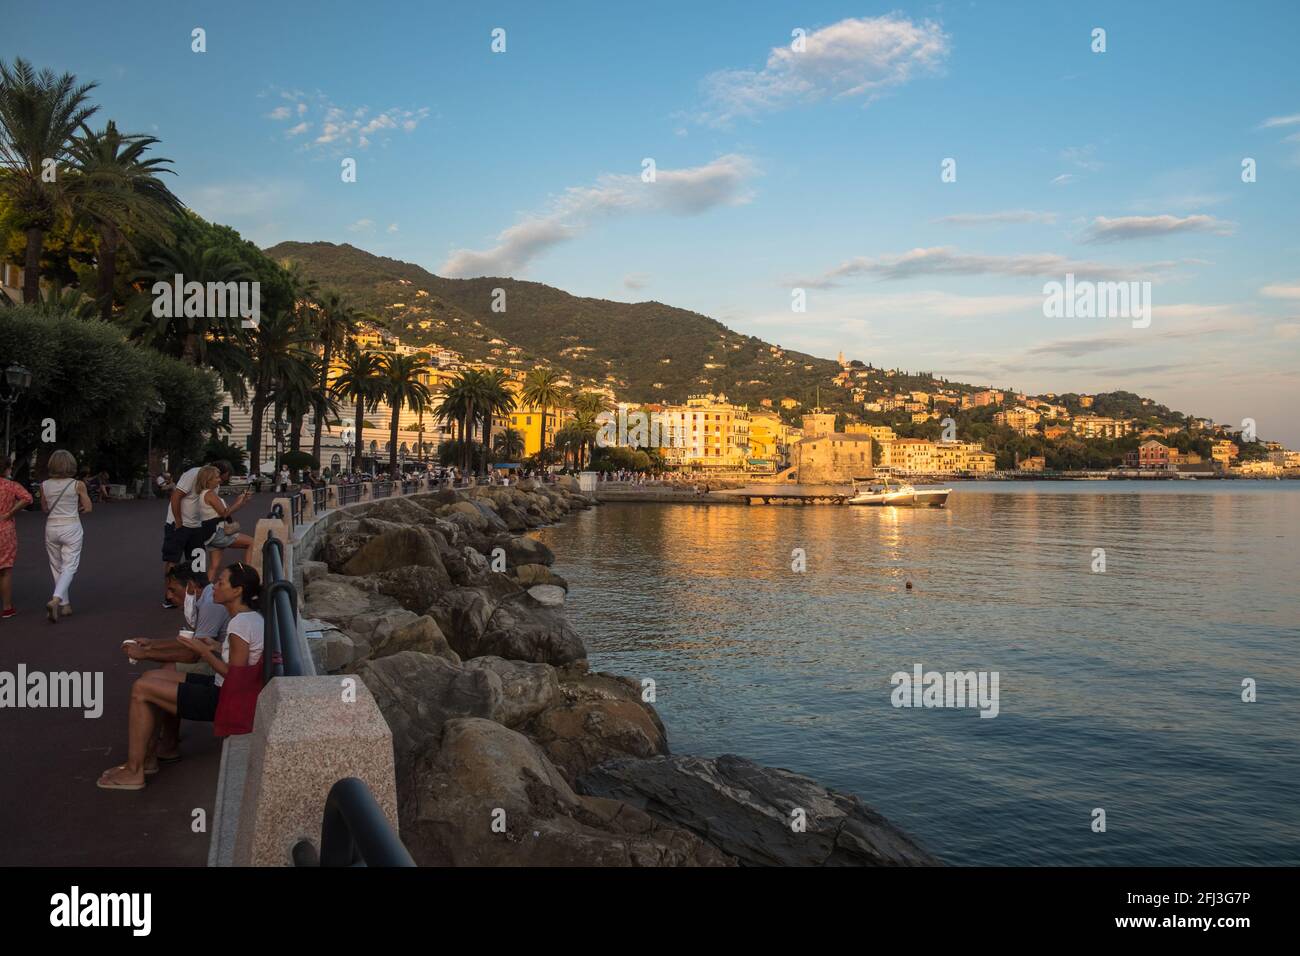 People are enjoying the 'lungomare' of Rapallo during summer. Rocks border the bay, while palm trees border the promenade. Stock Photo